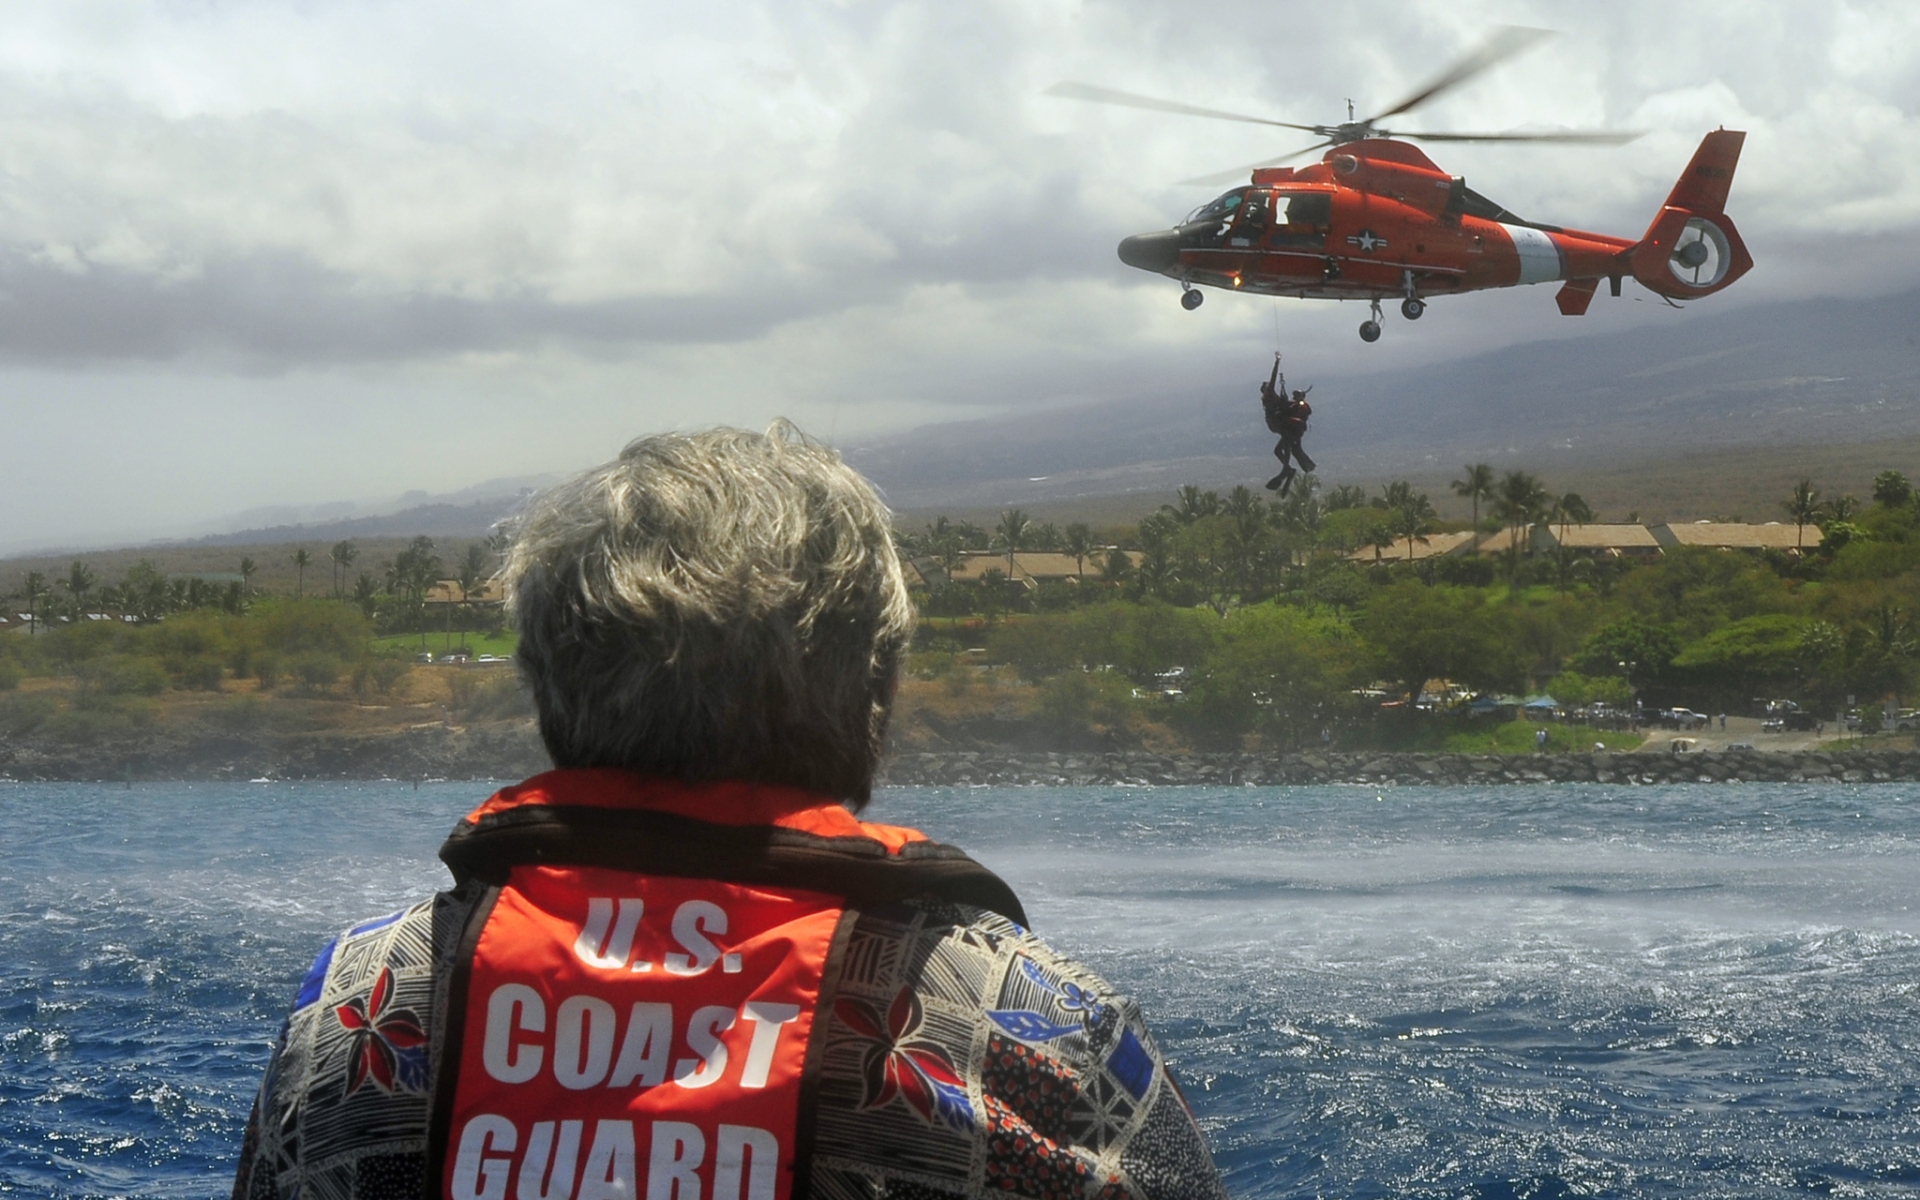 Free download Coast Guard Helicopter Rescue Desktop